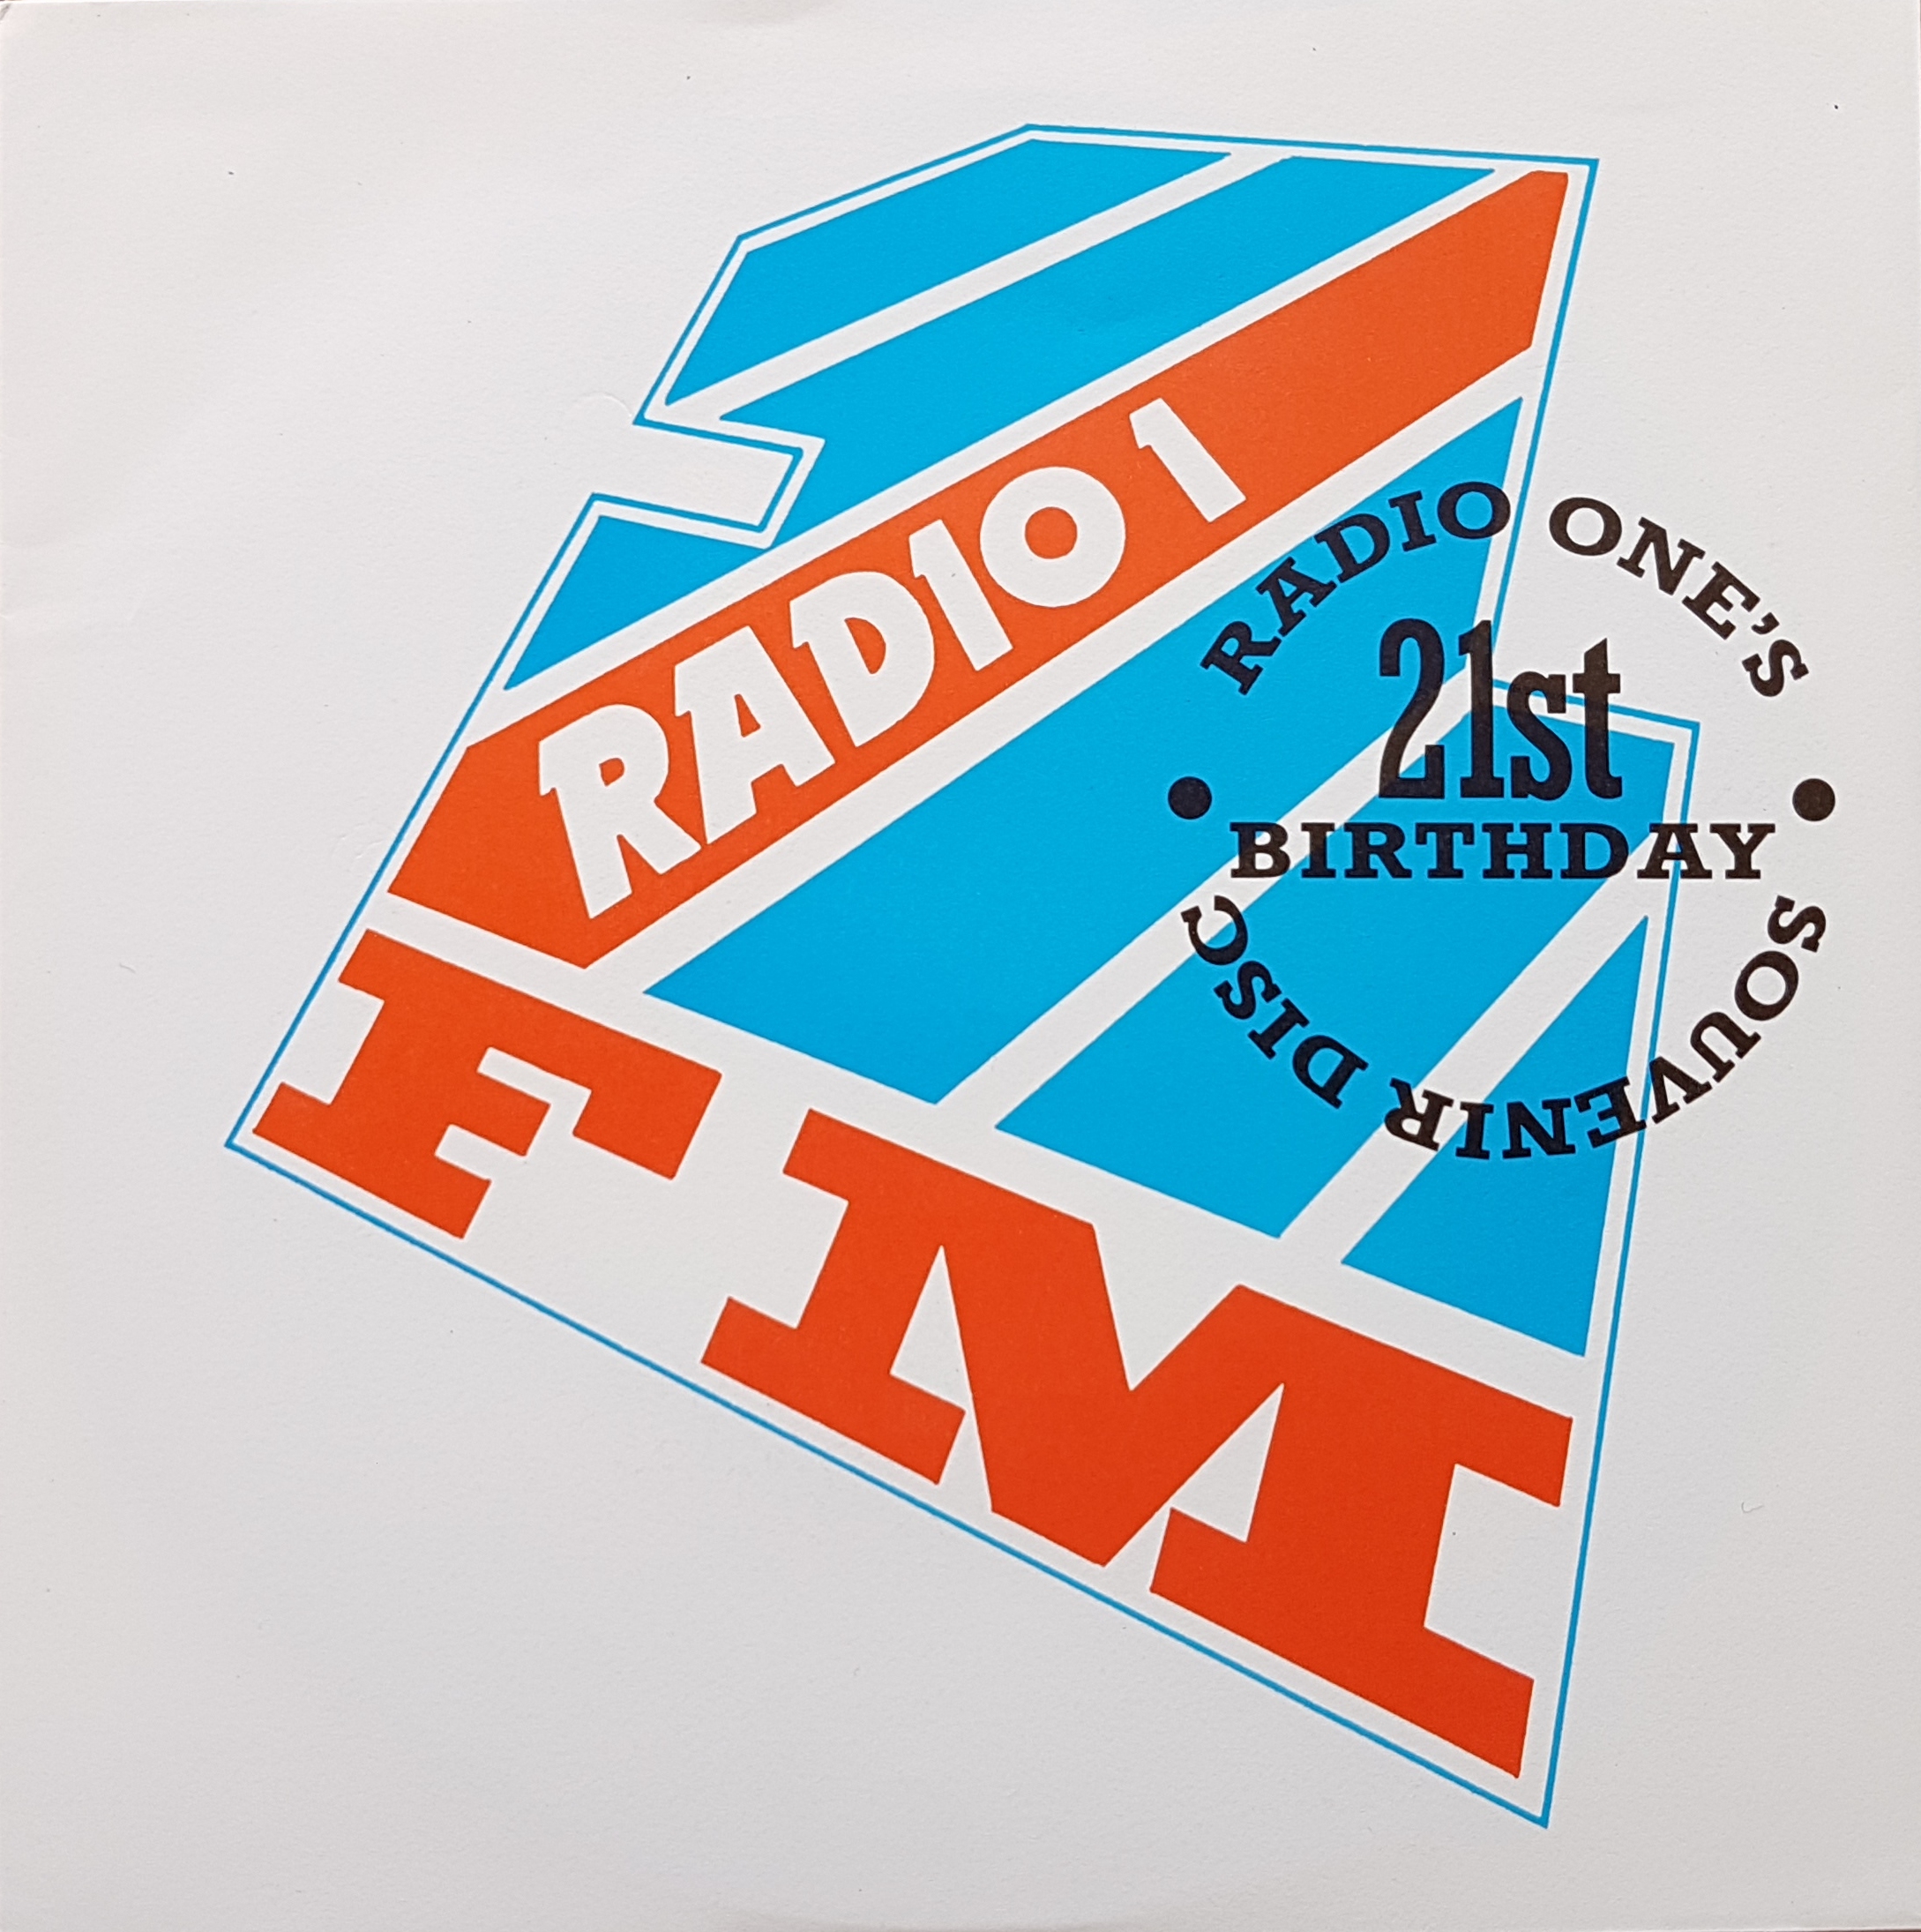 Picture of BBC R1 Radio1 21st birthday souvenir by artist Various from the BBC records and Tapes library